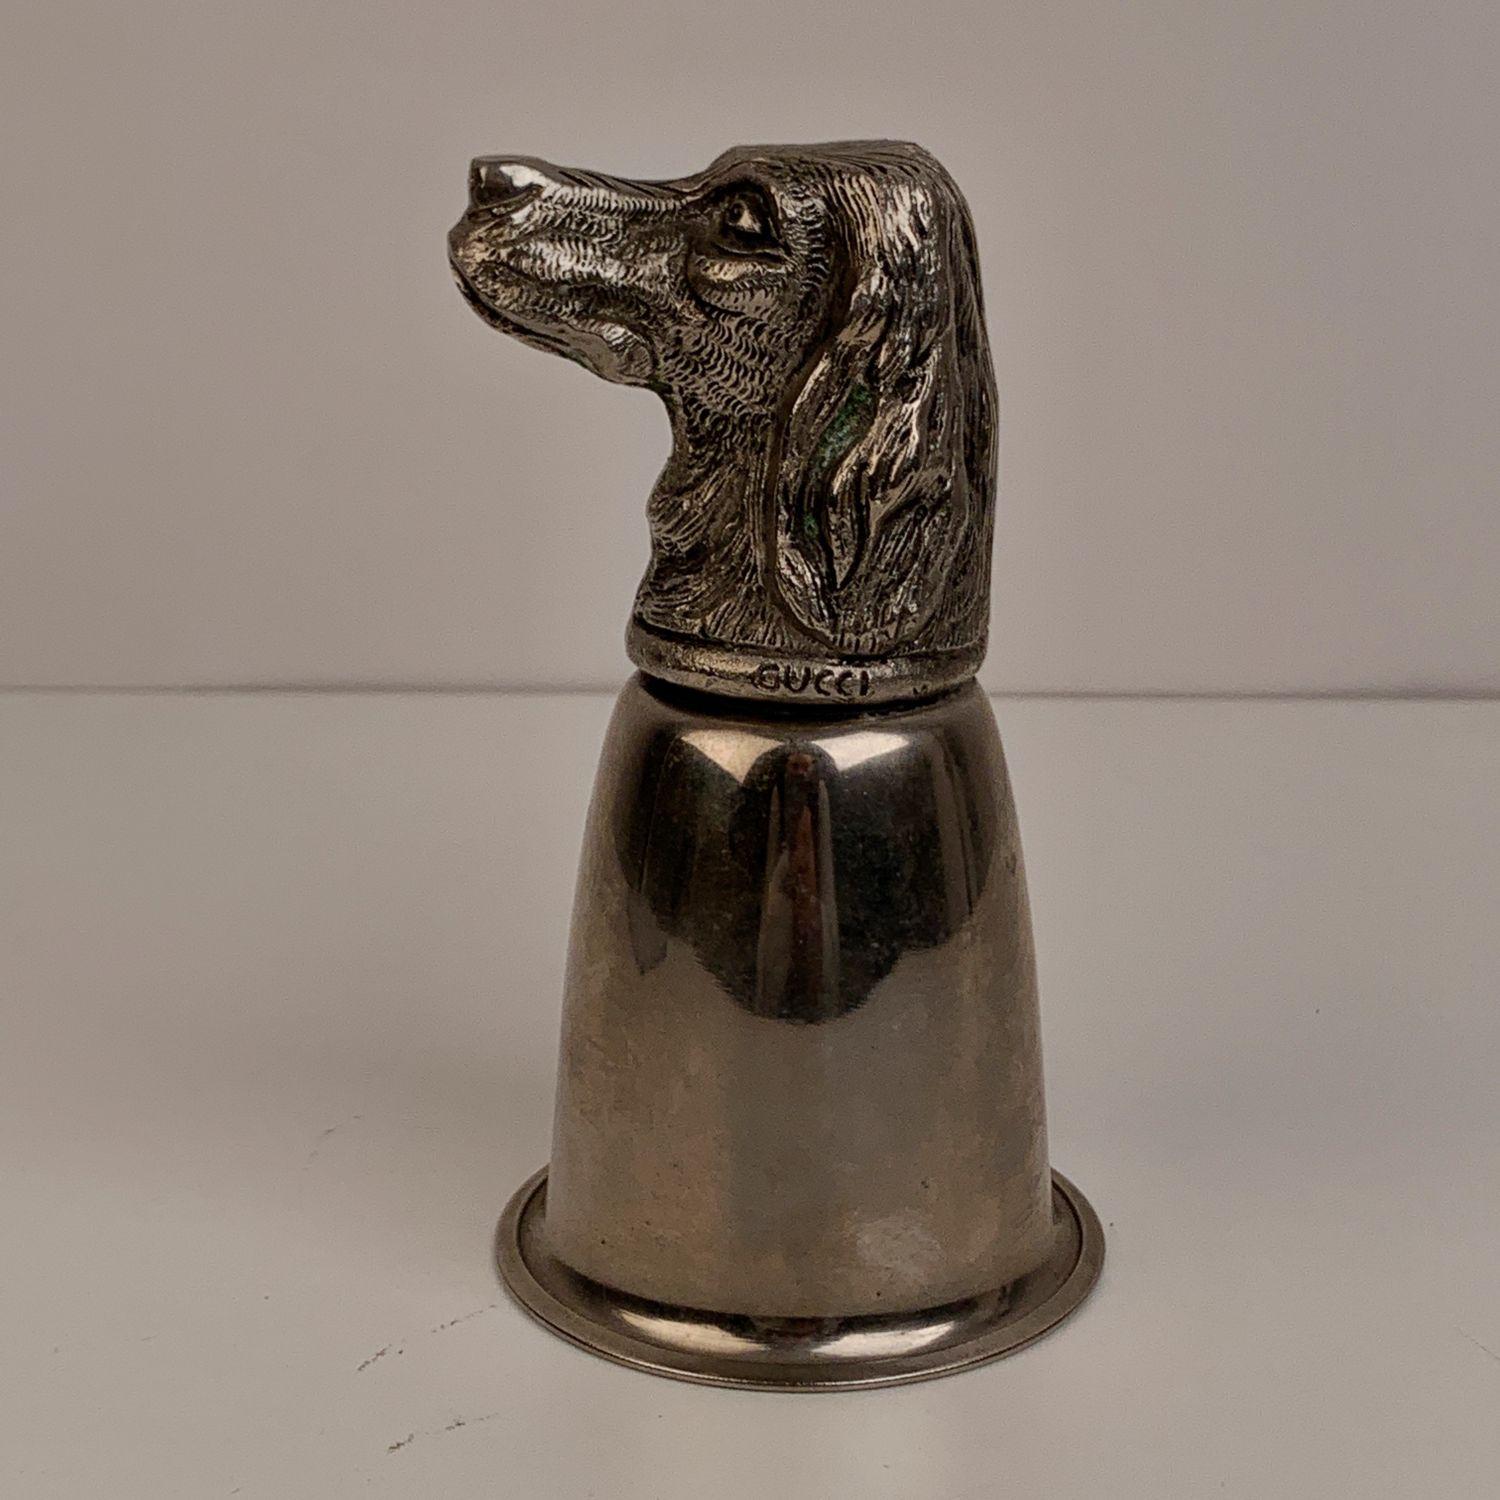 dog cup